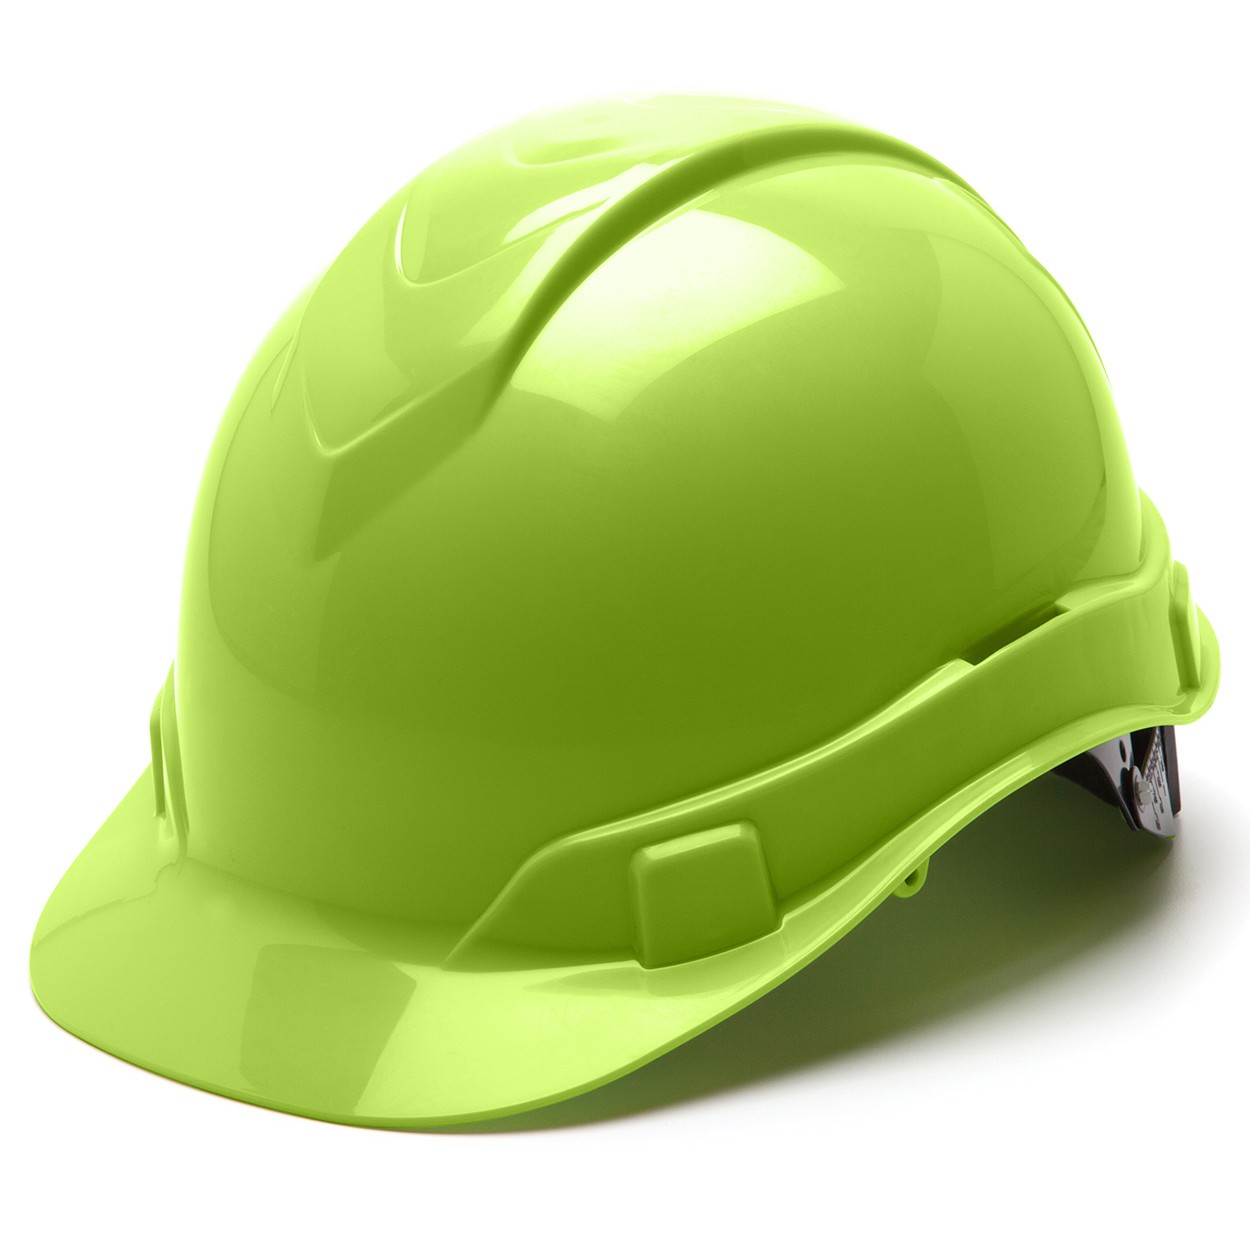 Pyramex Ridgeline Cap Style Hard Hat with 6 Point Ratchet Suspension from Columbia Safety